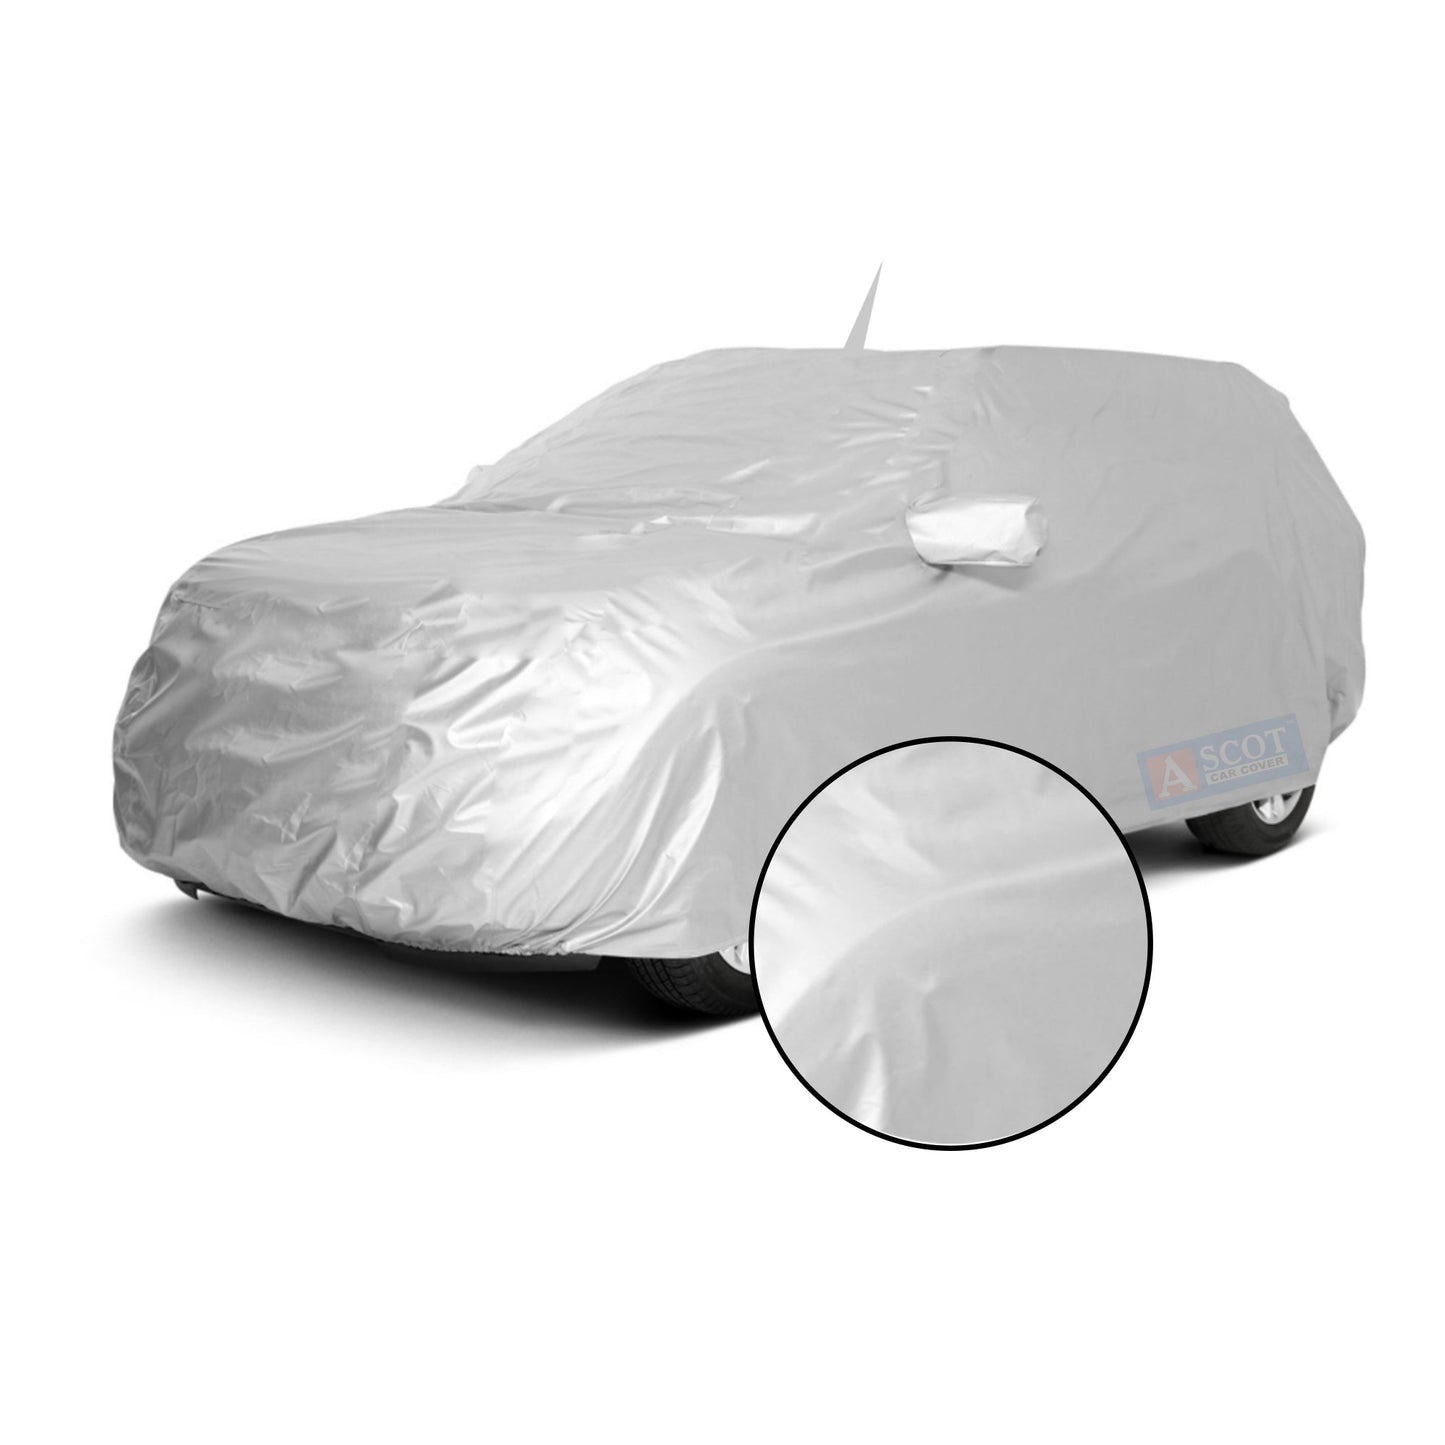 Ascot Volkswagen Polo GT Car Body Cover Dust Proof, Trippel Stitched